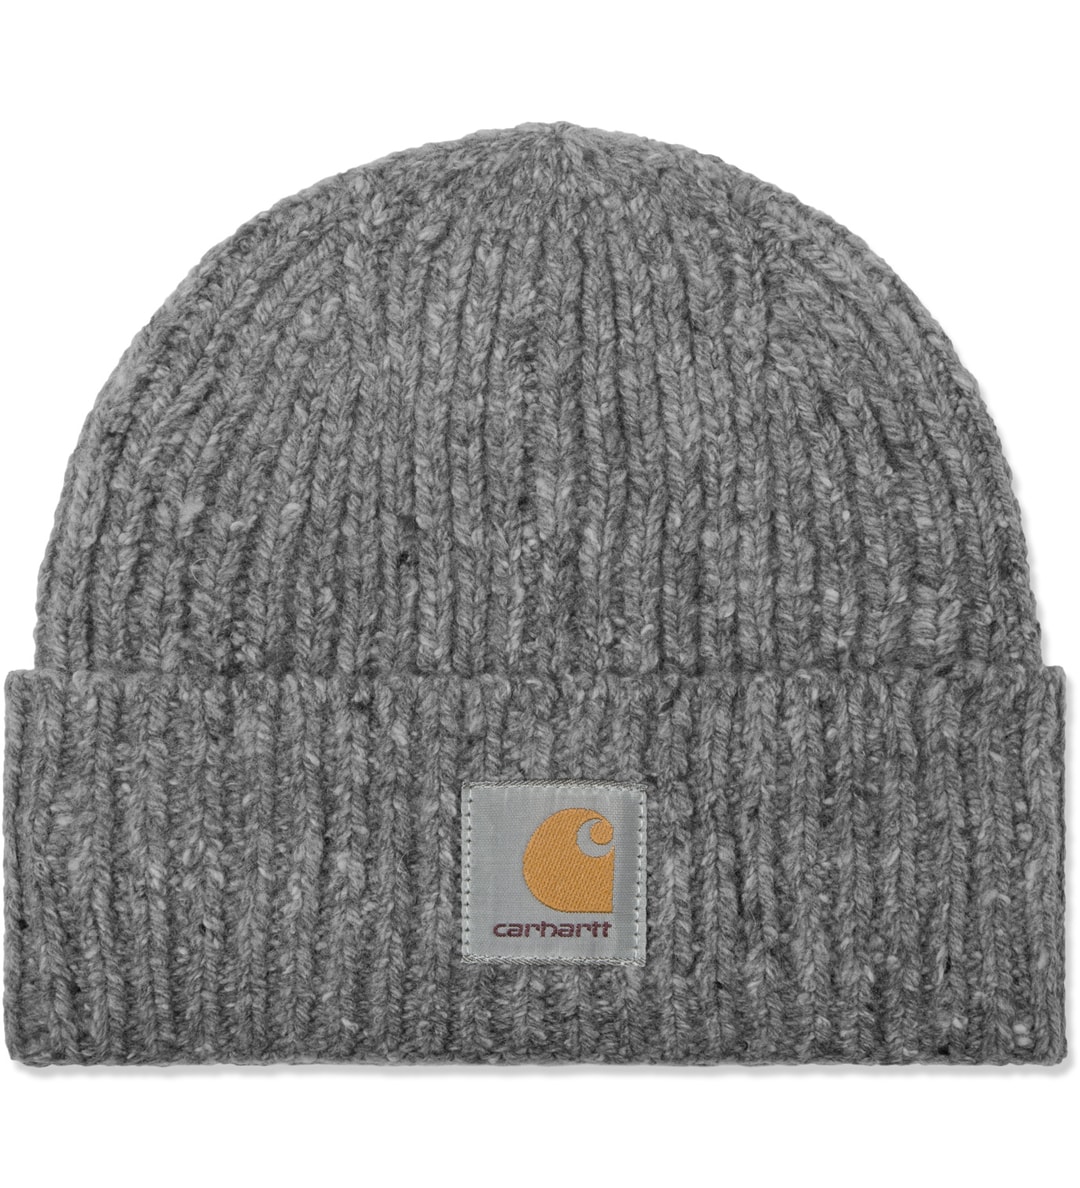 Carhartt Work In Progress - Dark Heather Anglistic Beanie | HBX - Globally Curated and Lifestyle by